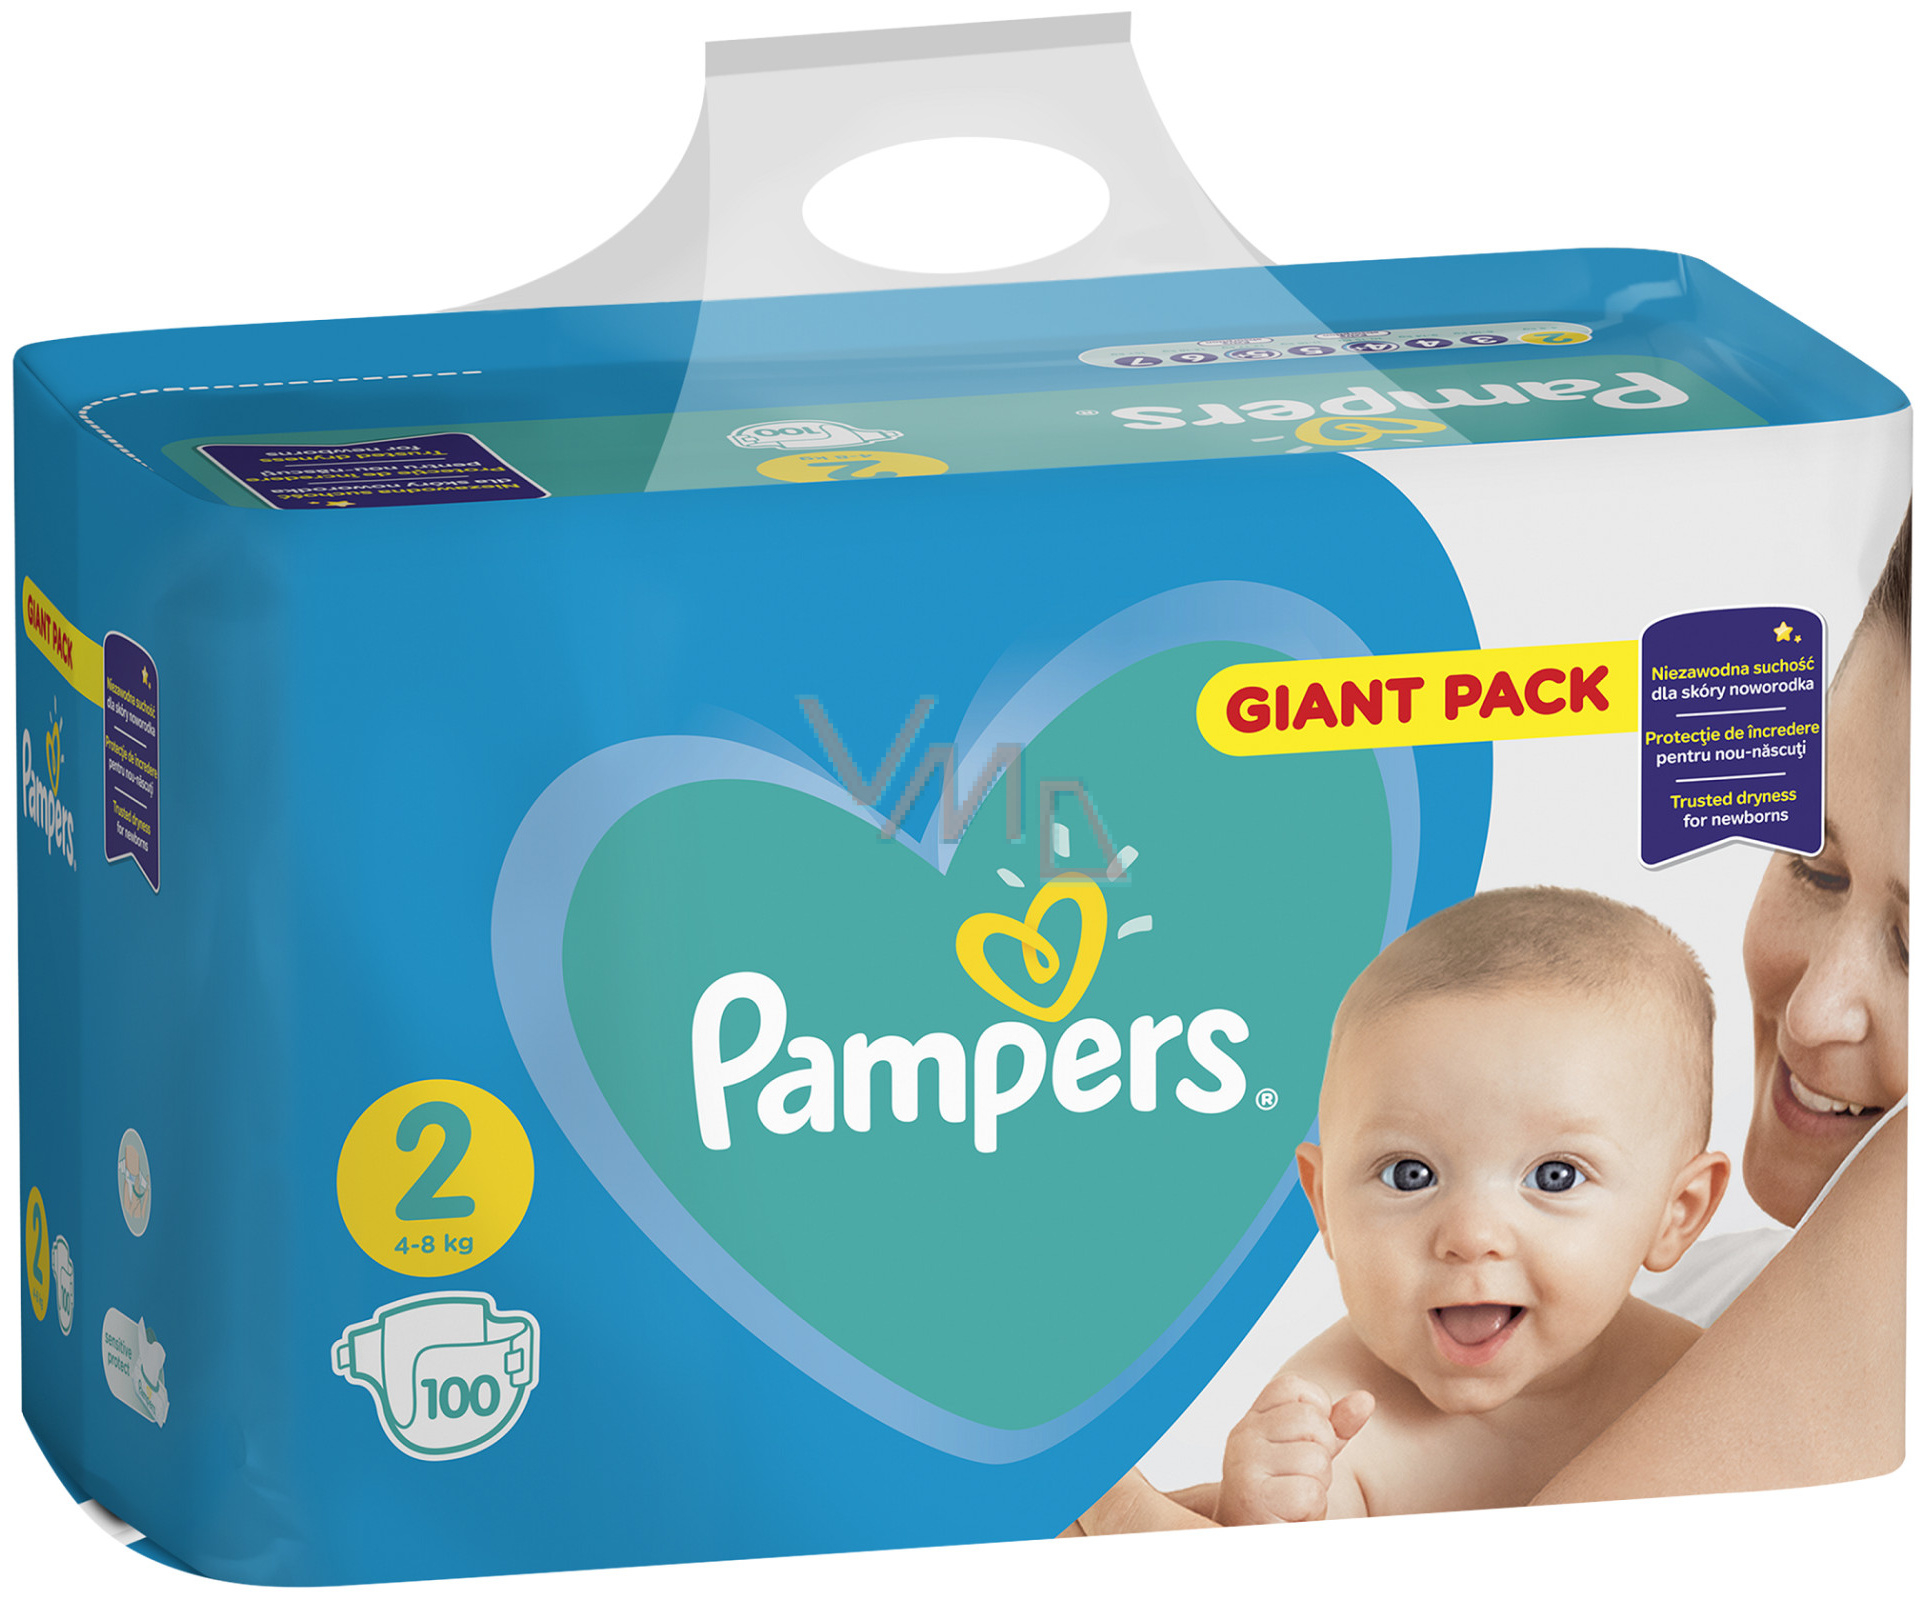 pampers noc